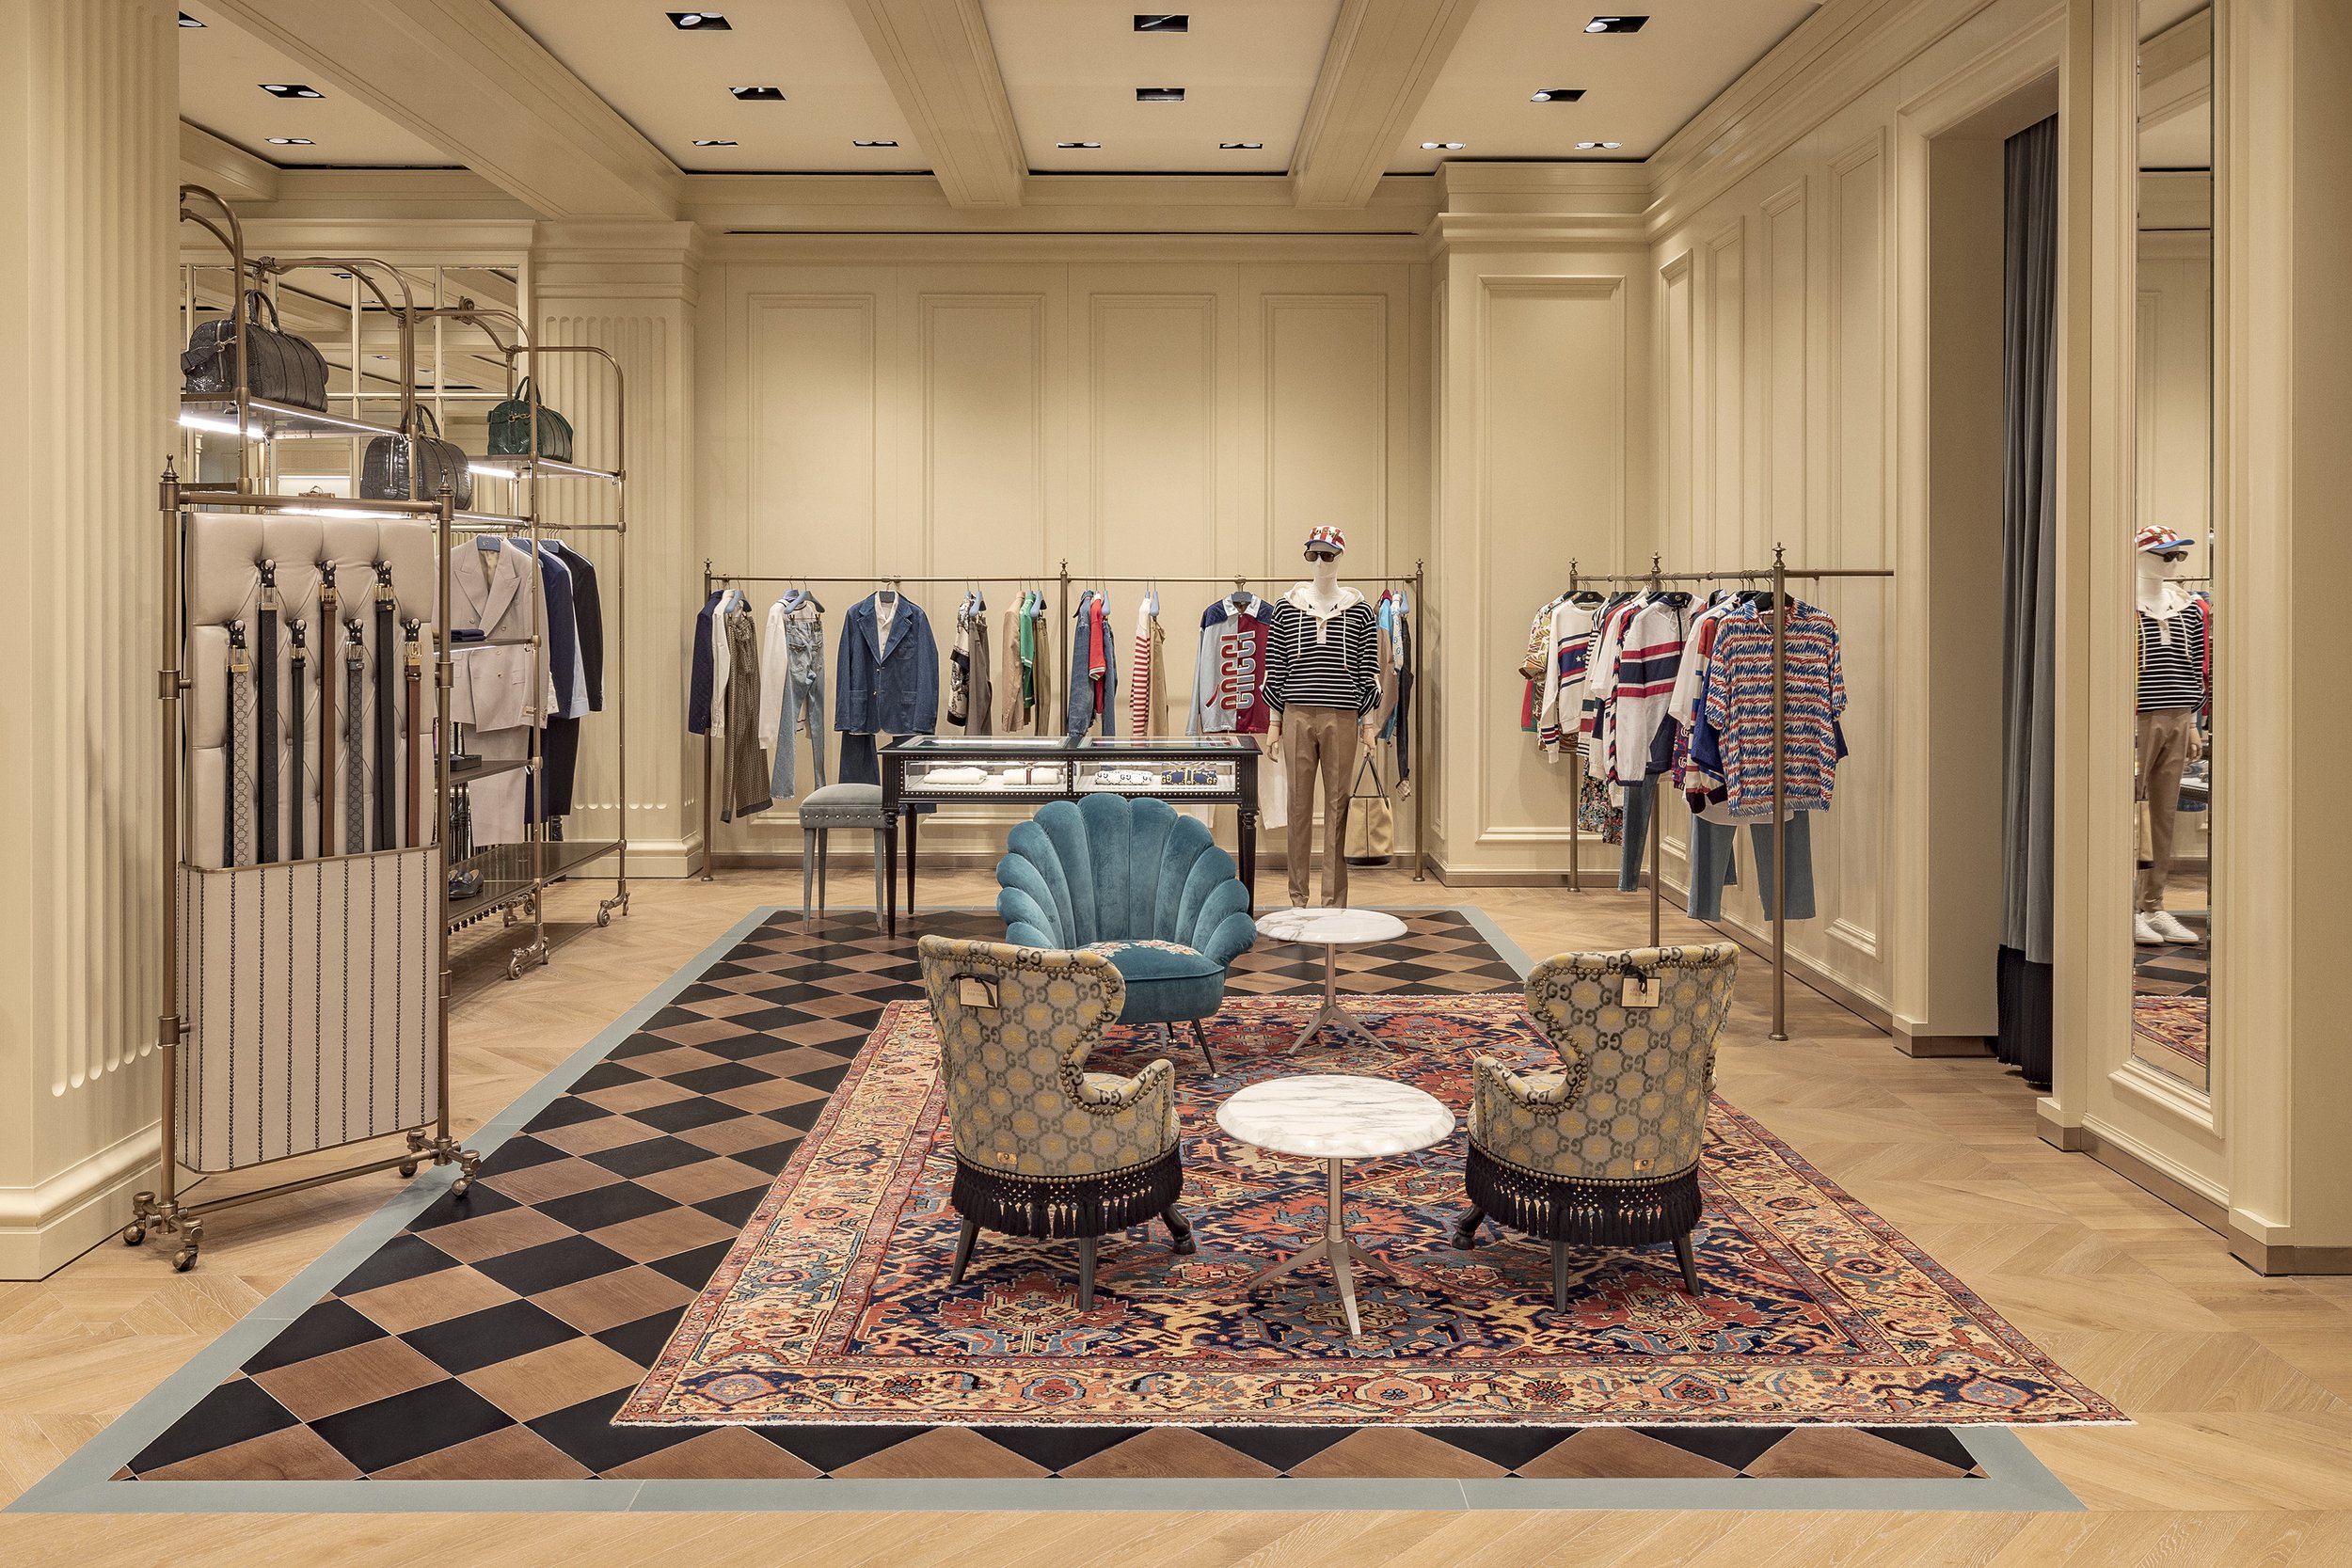 Gucci Opens Newly Expanded Two-Story Lavish Boutique At Bal